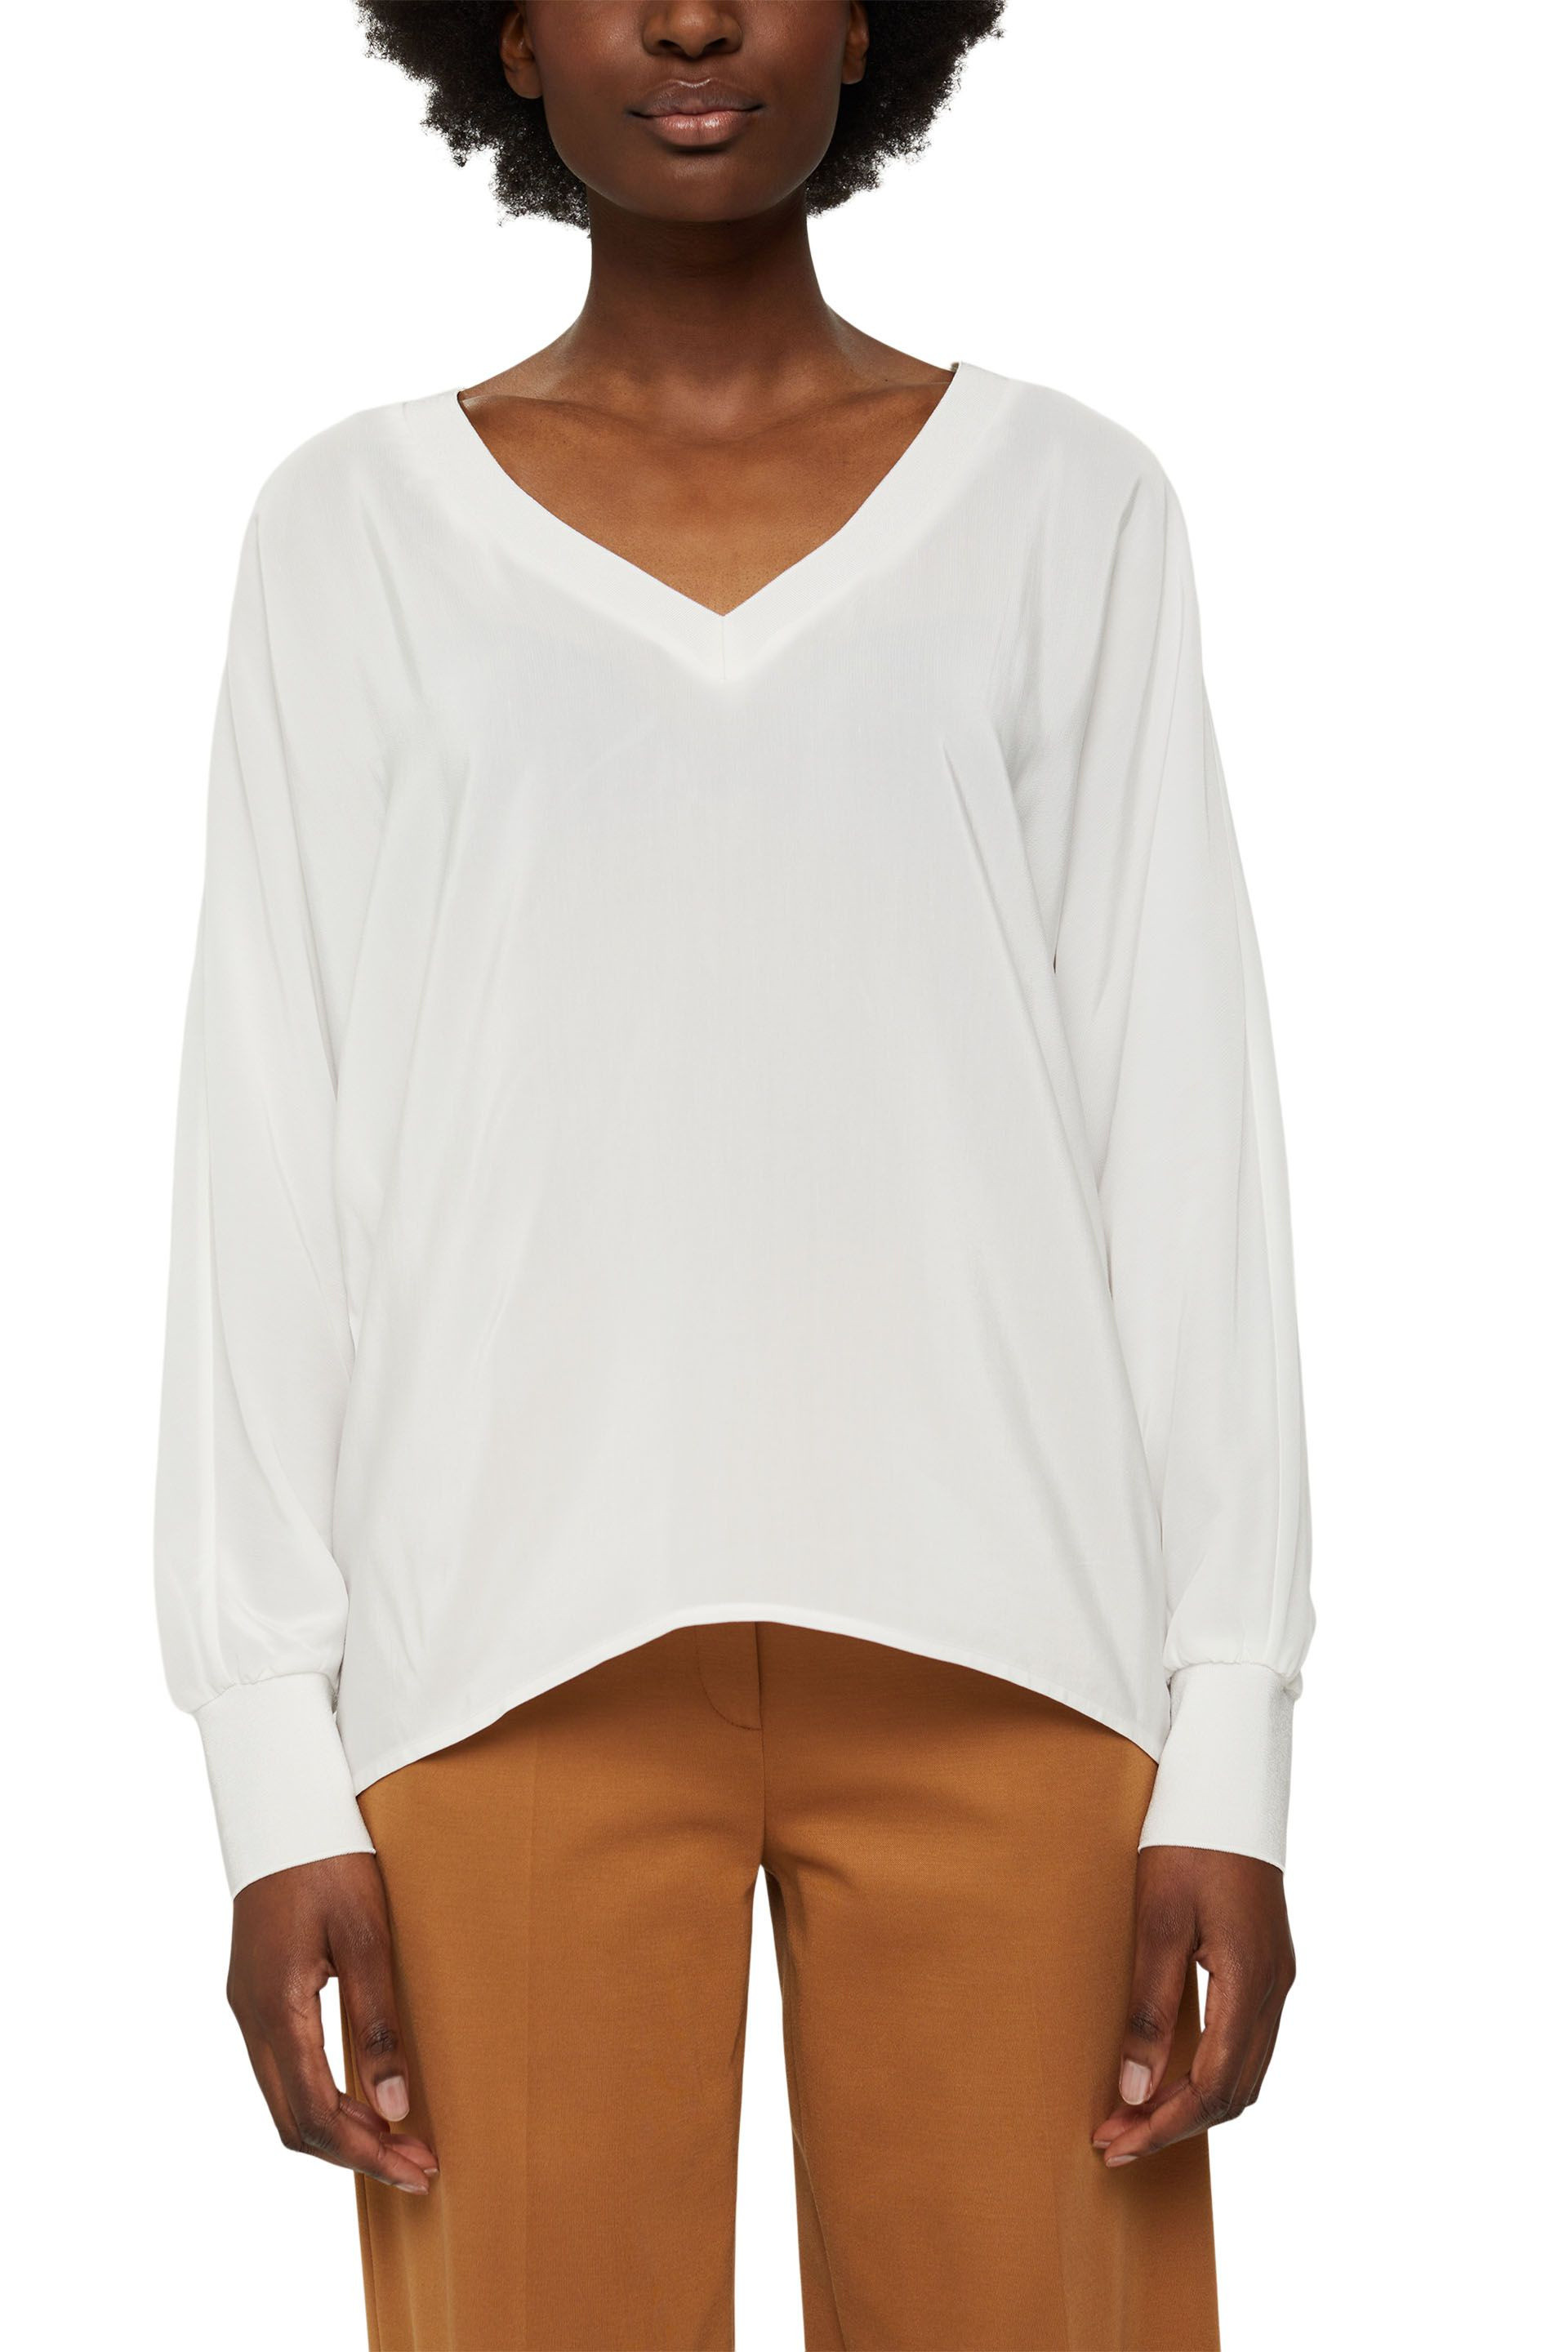 Blouse with sporty edges in ribbed knit, White, large image number 1